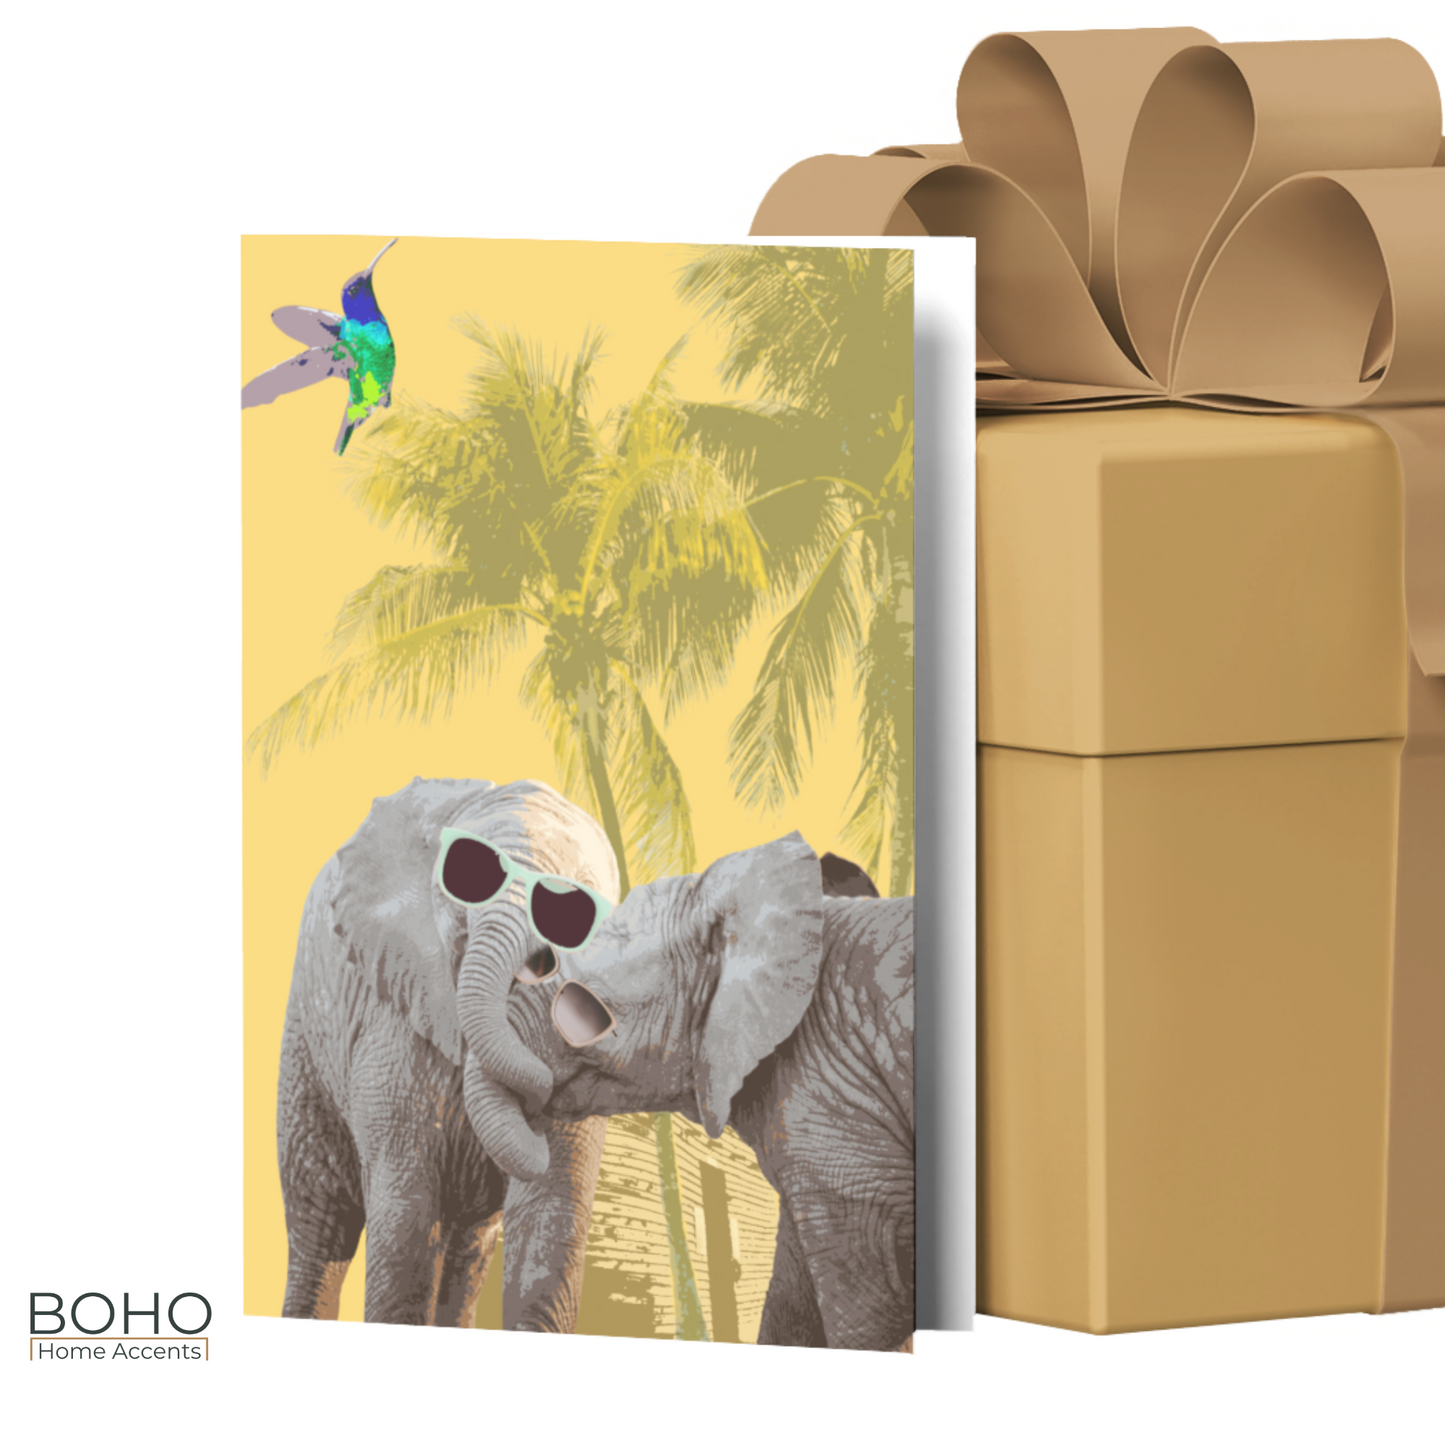 Art Card, Happy Elephants everyday Greeting Card, Birthday Card, All occasions blank note card, Blank inside, 5x7 with envelope | Boho Home Accents